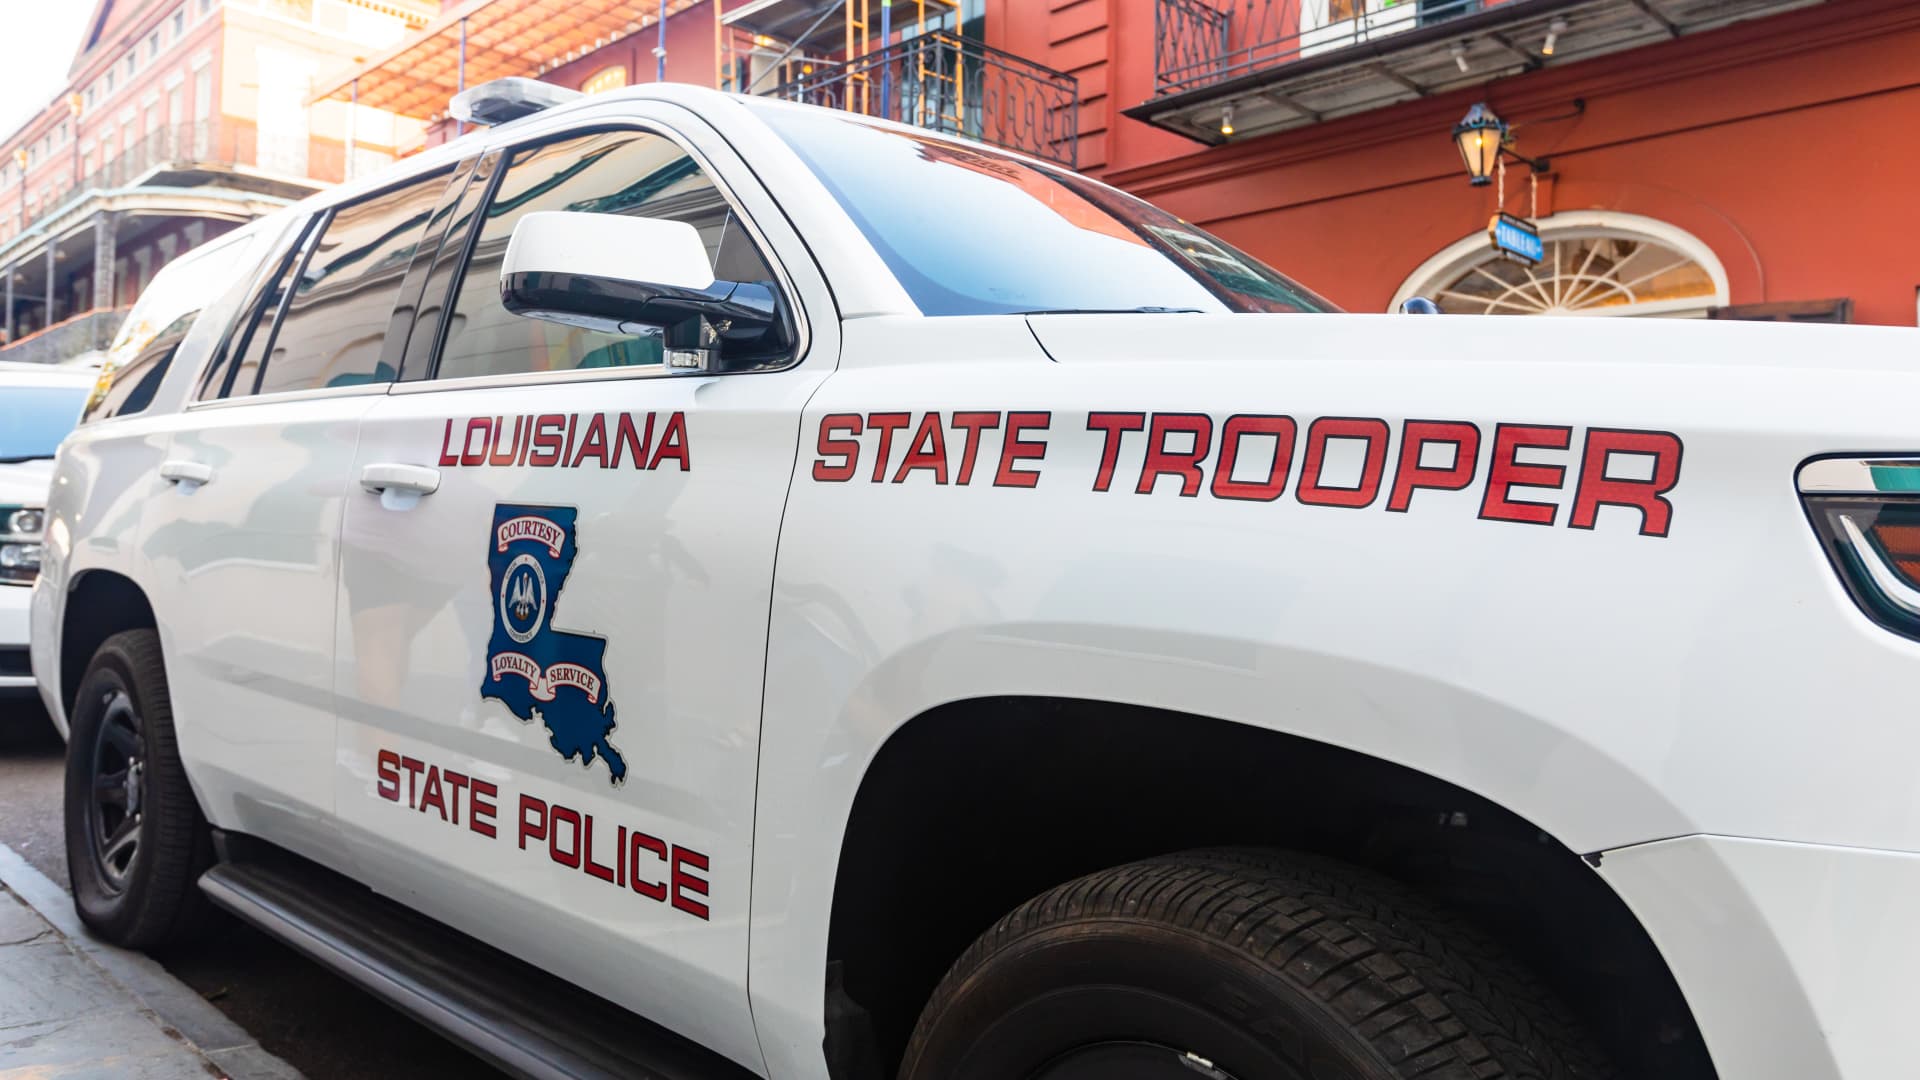 Louisiana State Trooper Vehicle in the New Orleans French Quarter